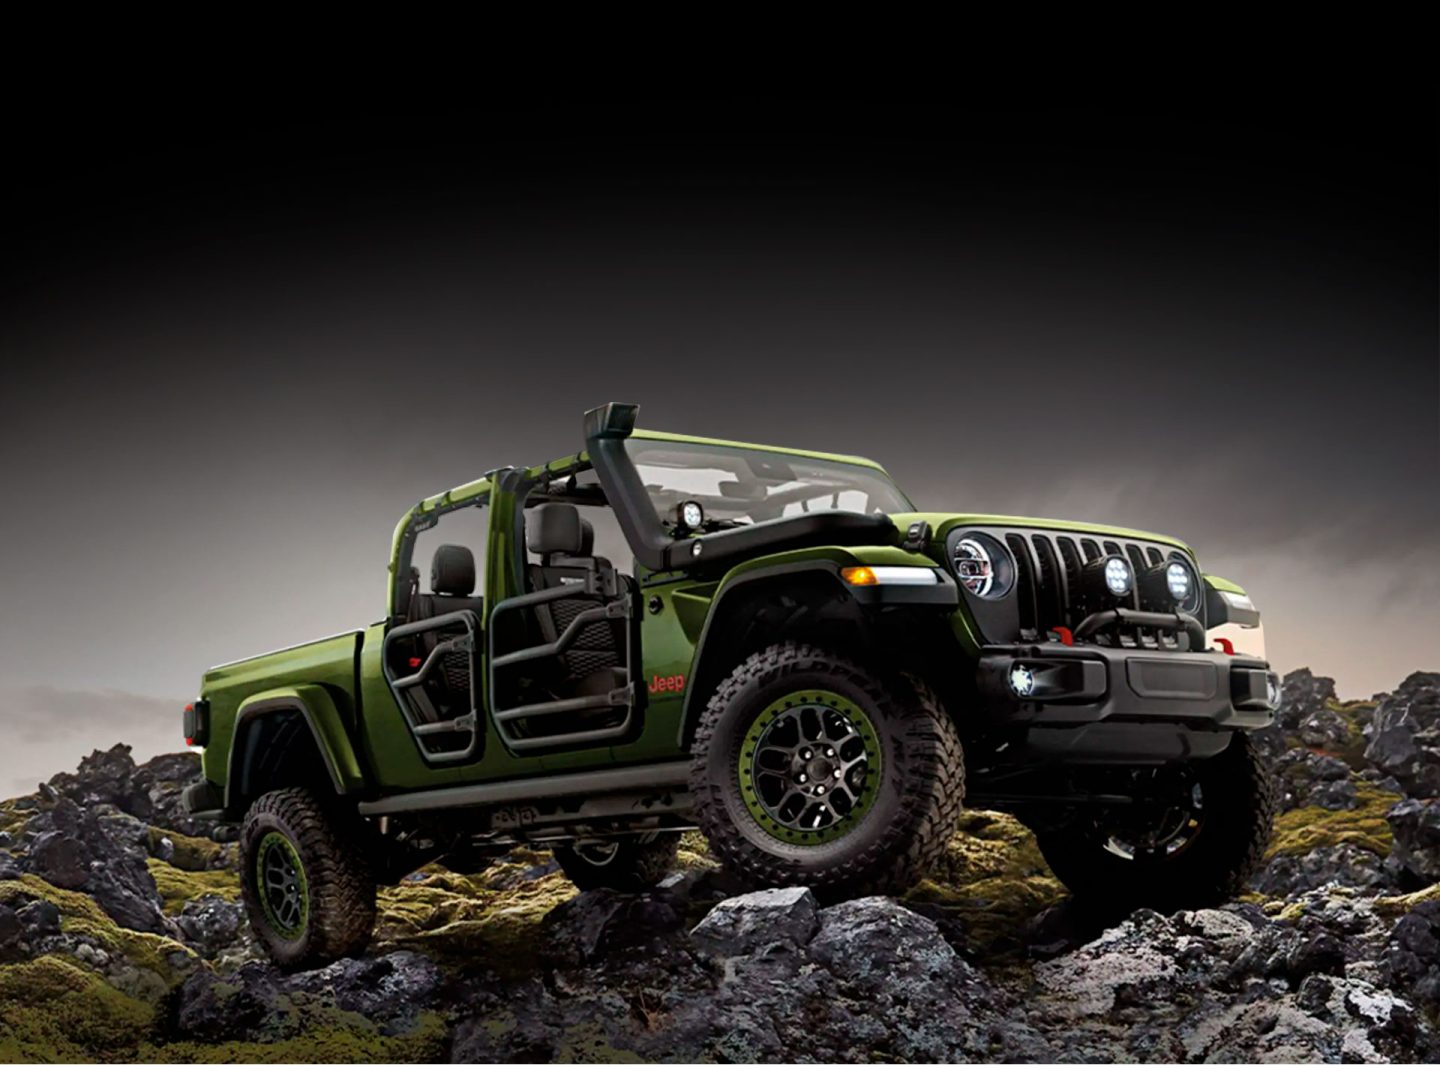 A Jeep Gladiator Rubicon modified with Jeep Performance Parts parked on a rocky incline with tube doors on and roof removed.